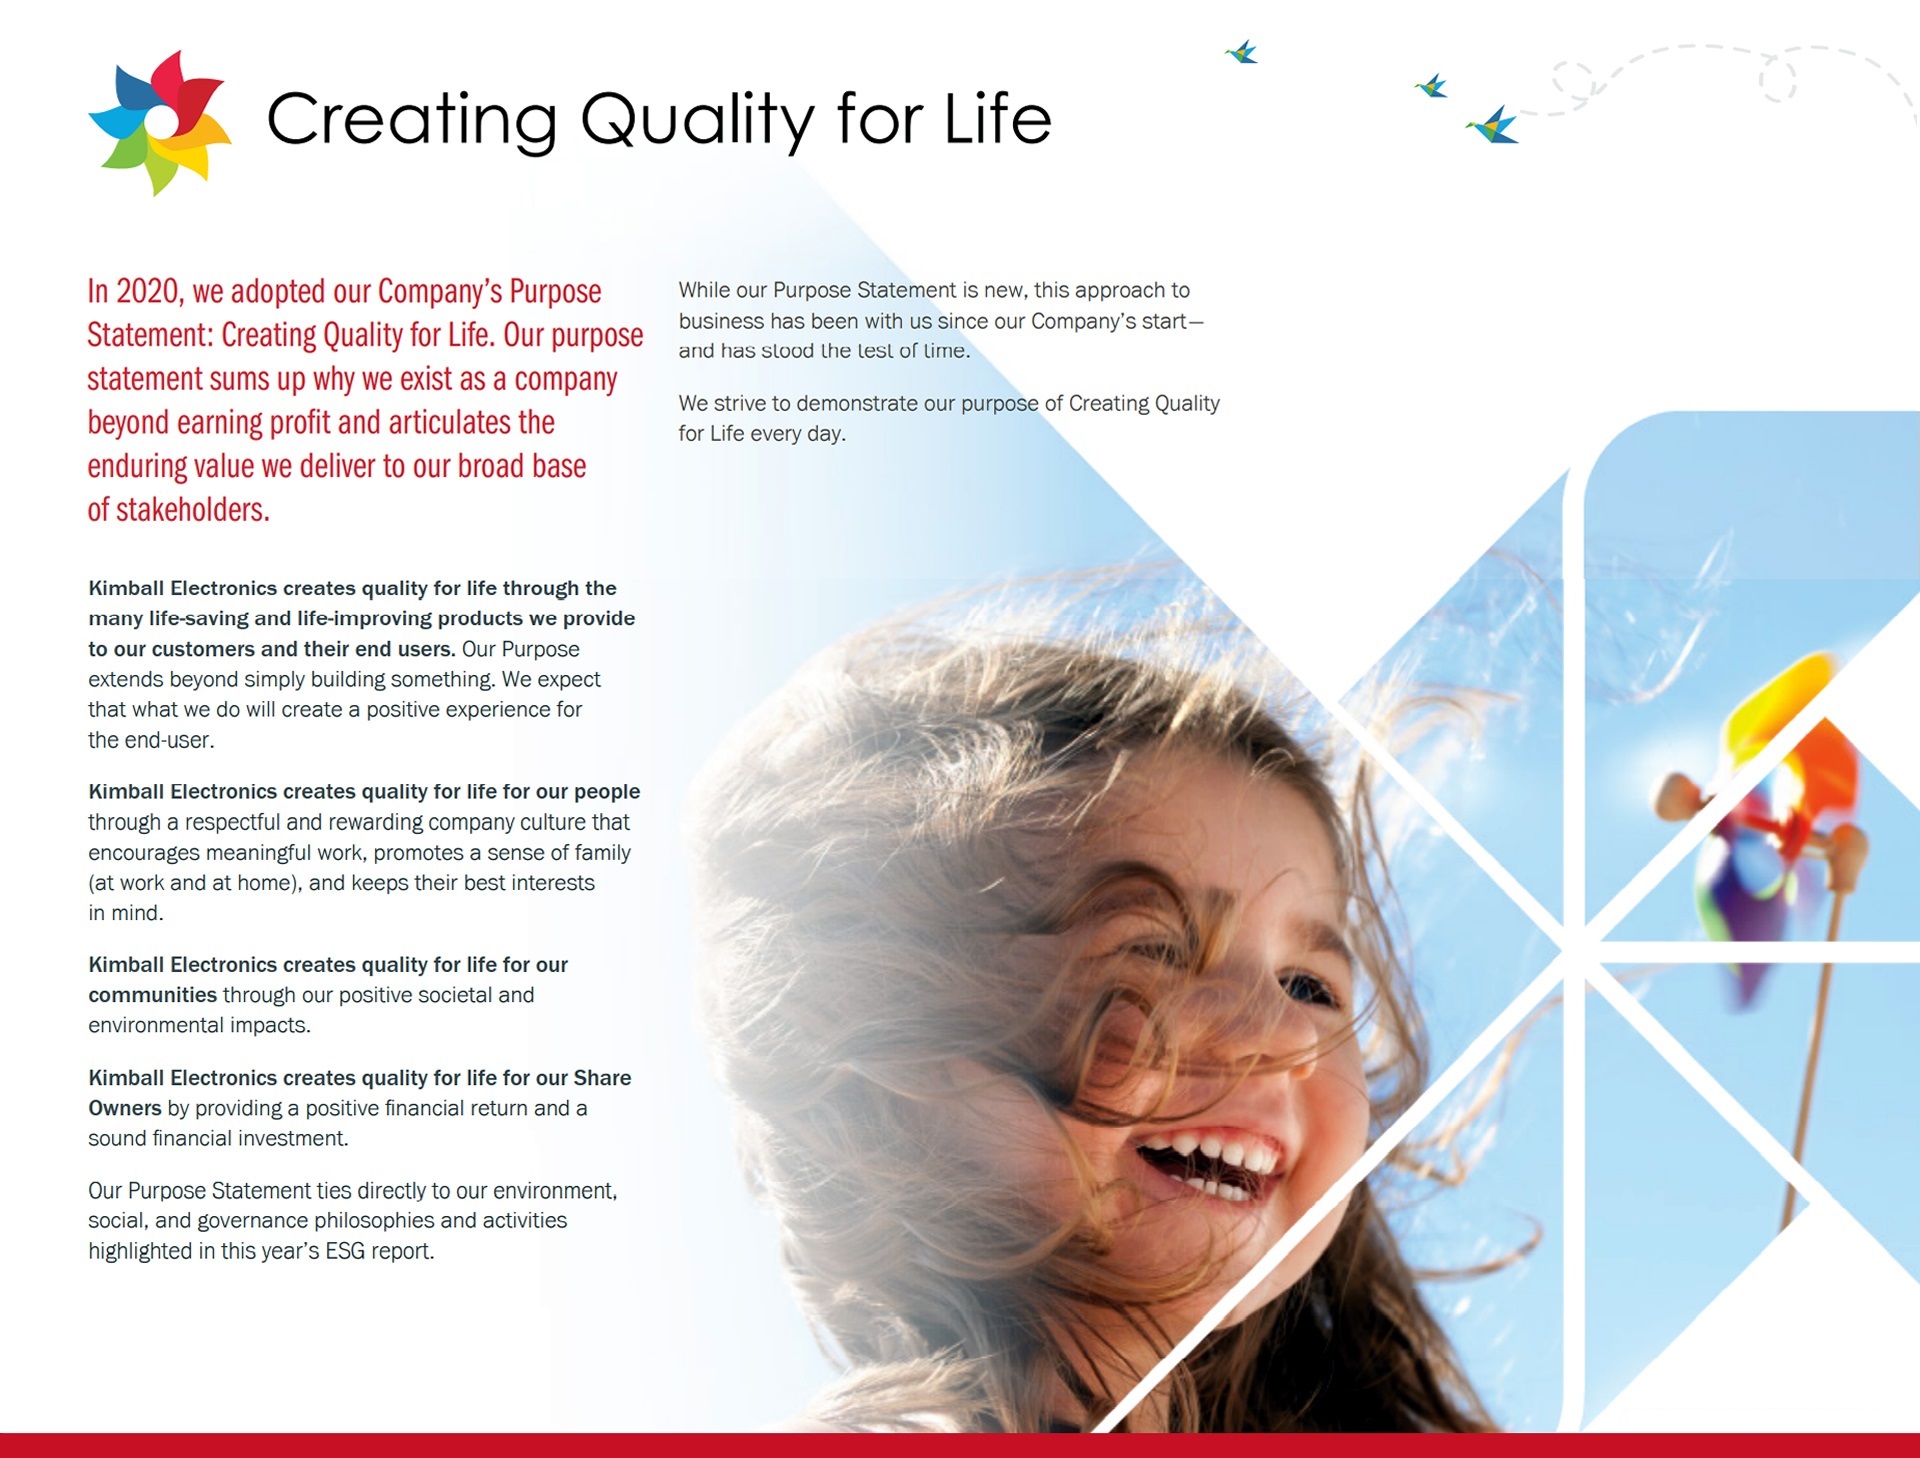 Creating Quality for Life Summary